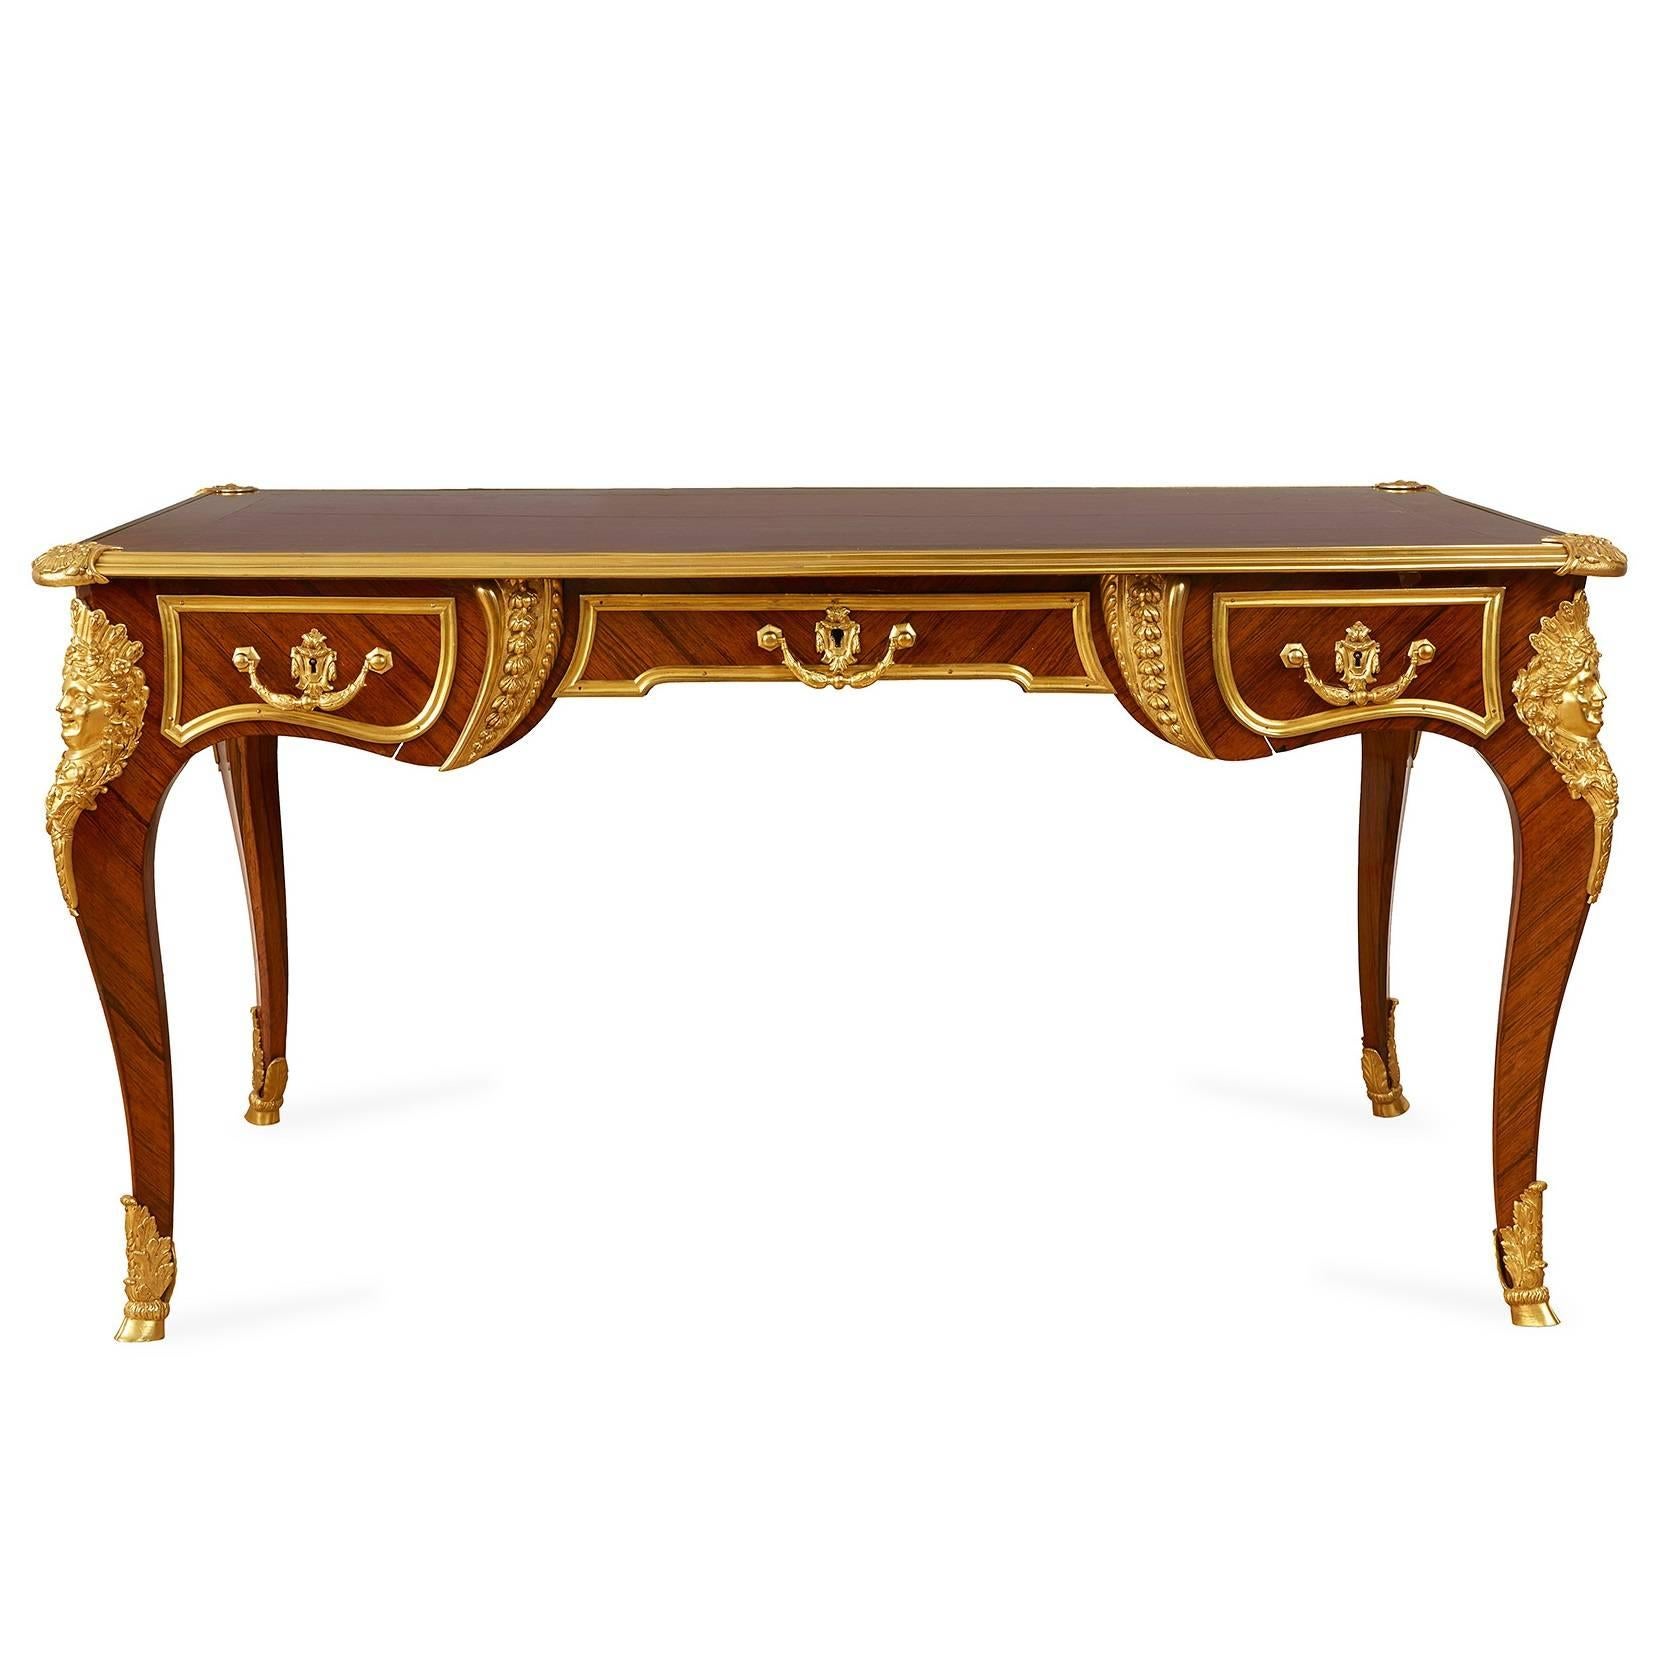 This beautiful desk, beautifully finished in kingwood, leather and gilt bronze, is a fantastic piece of 19th century French design in the Louis XV style. Elegant, beautifully crafted and yet with a cool simplicity, this will make an excellent piece